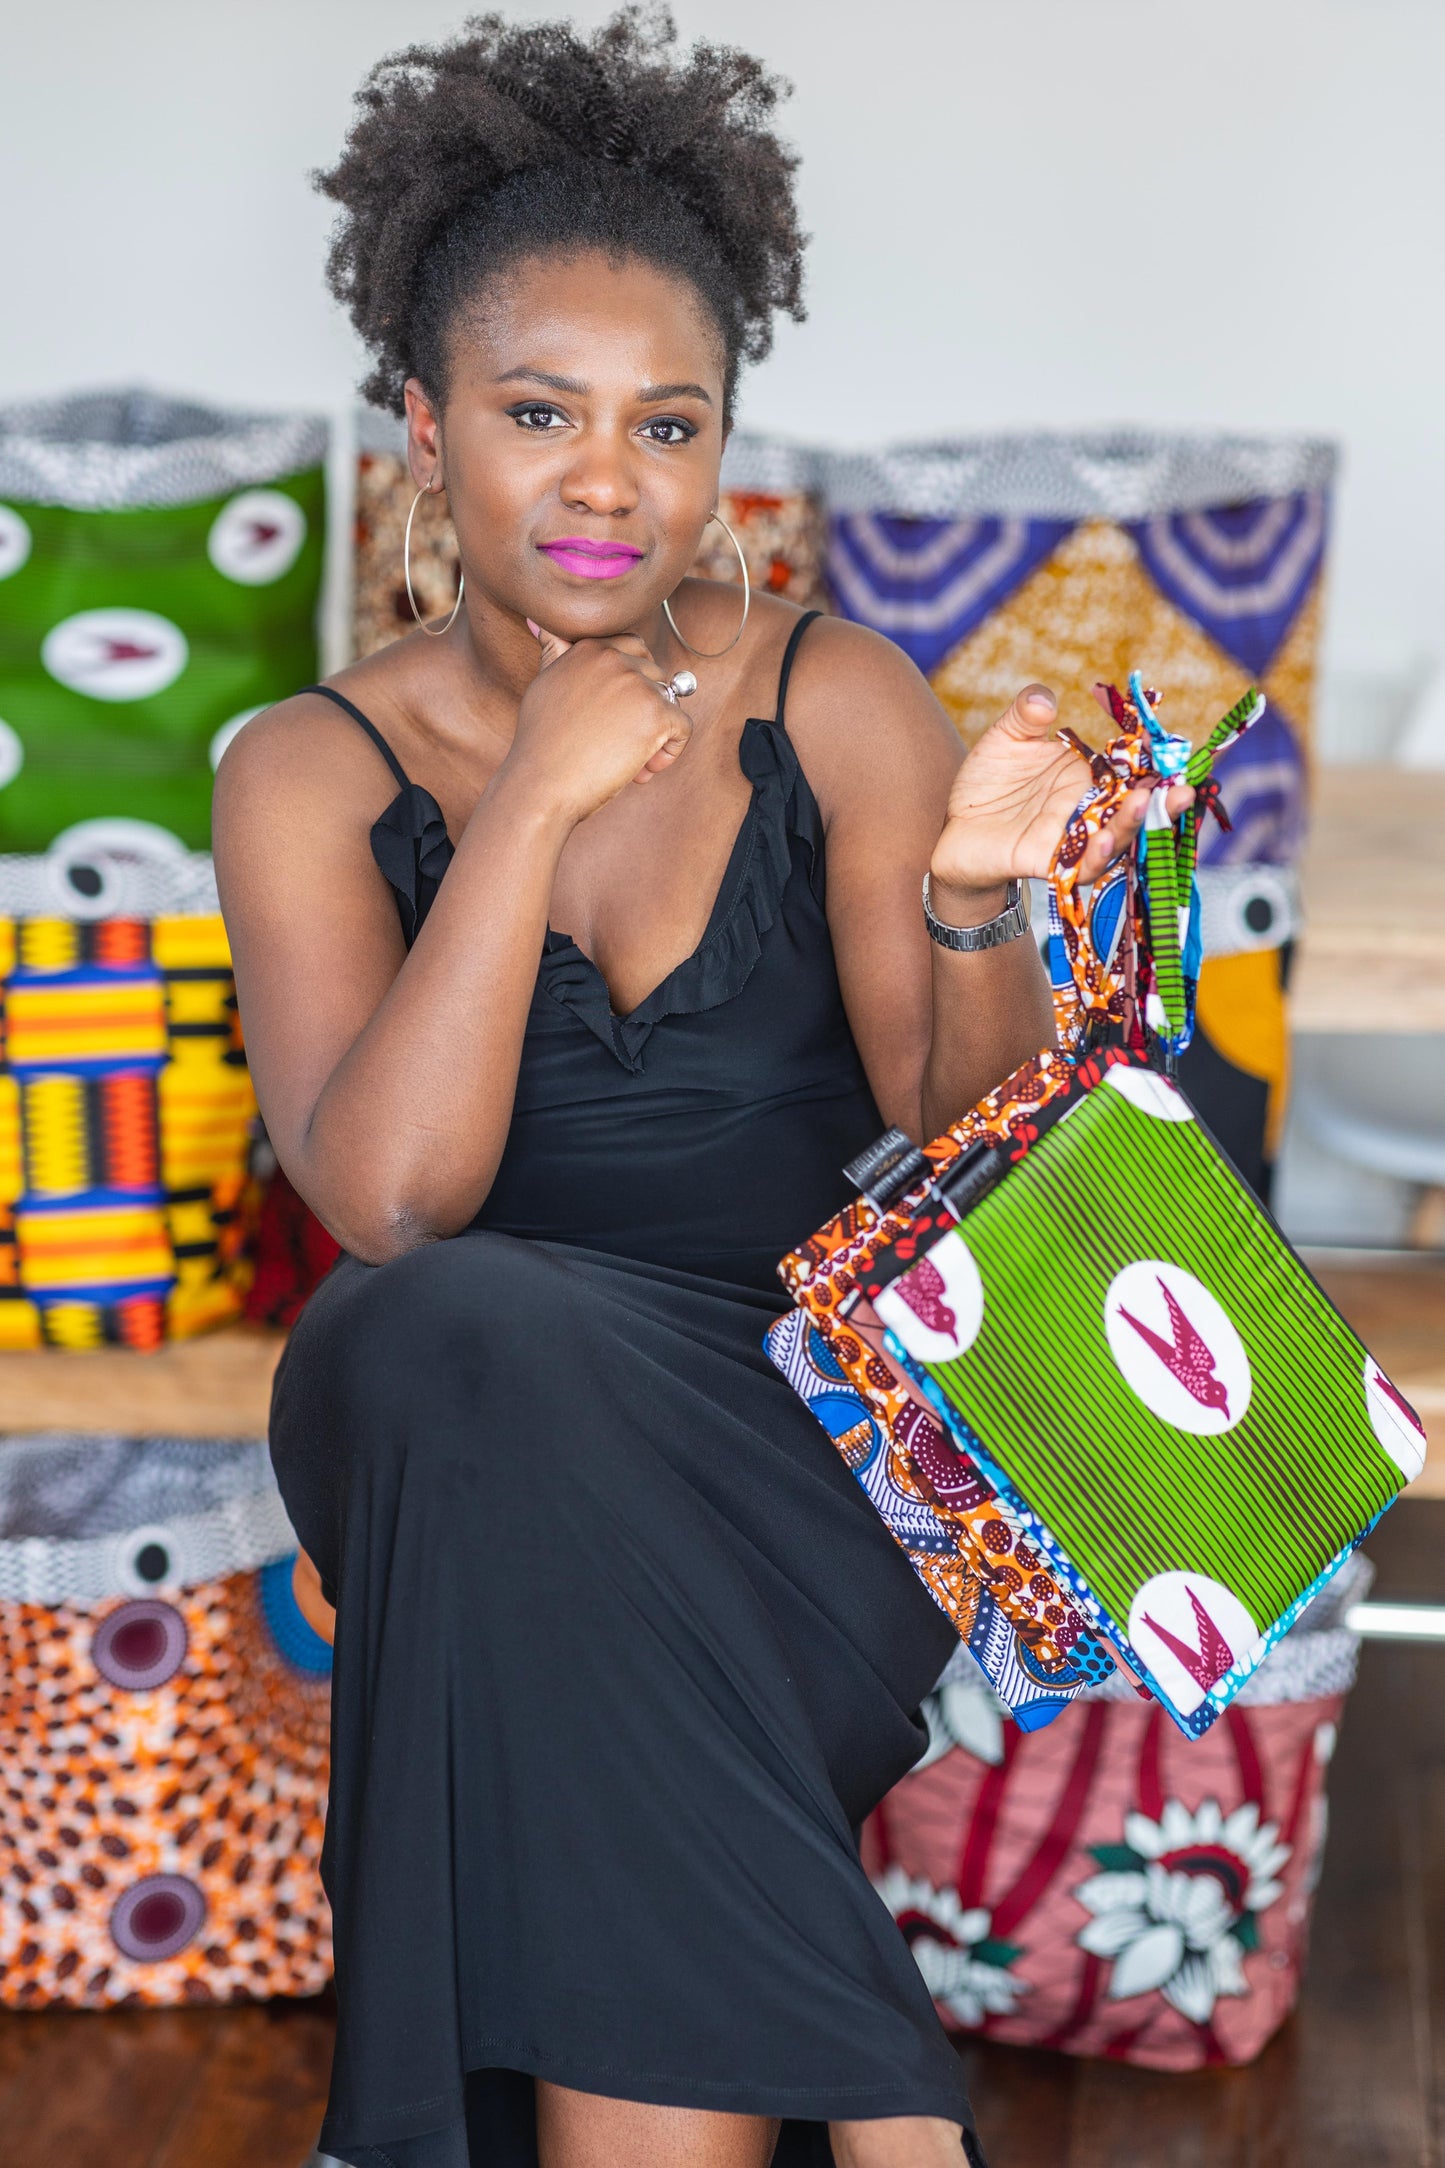 Large African Print Zip Pouch | Adedapo Print